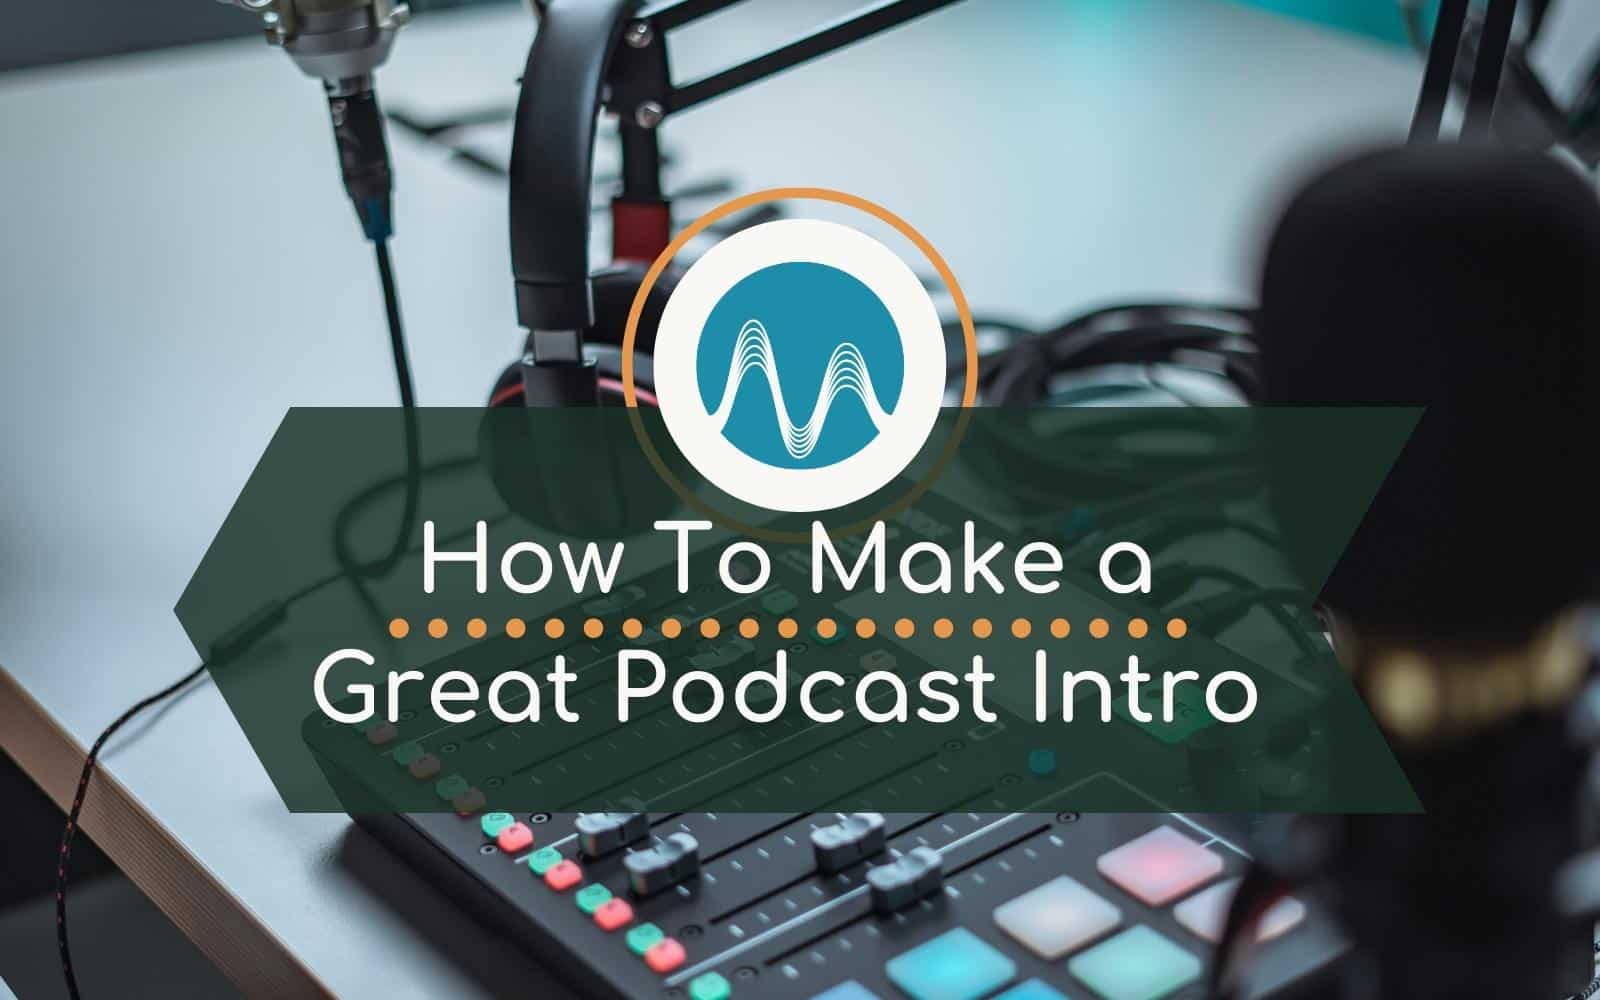 How Do You Make A Great Podcast Intro?